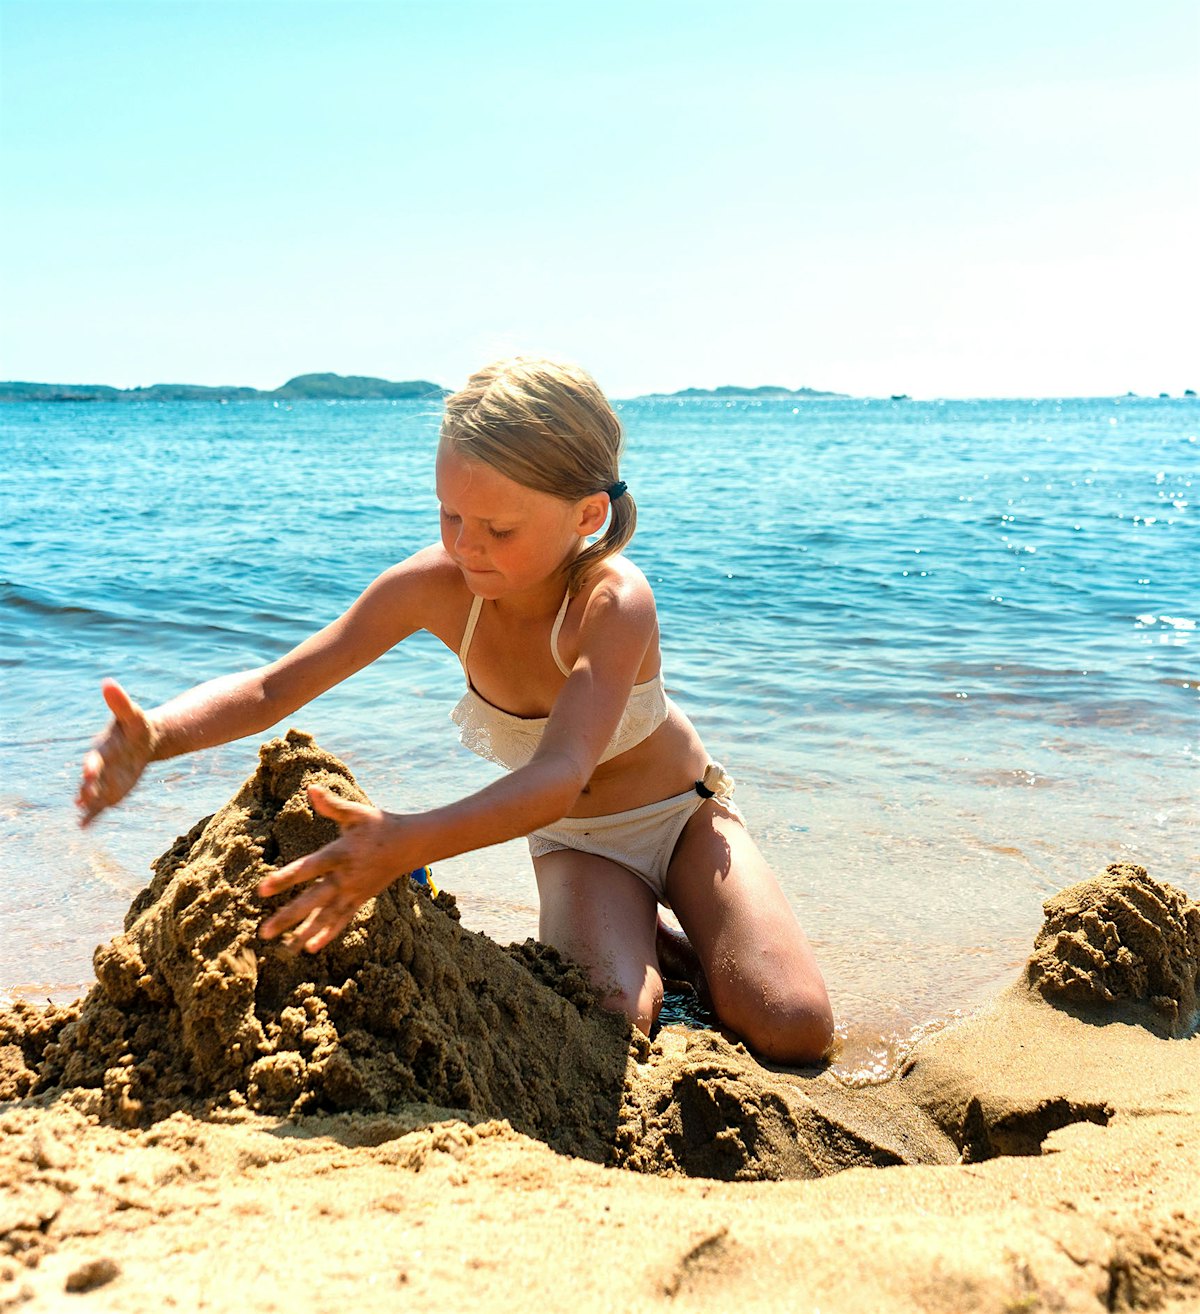 Girl sits on the edge of the beach and builds sandcastles. Photo